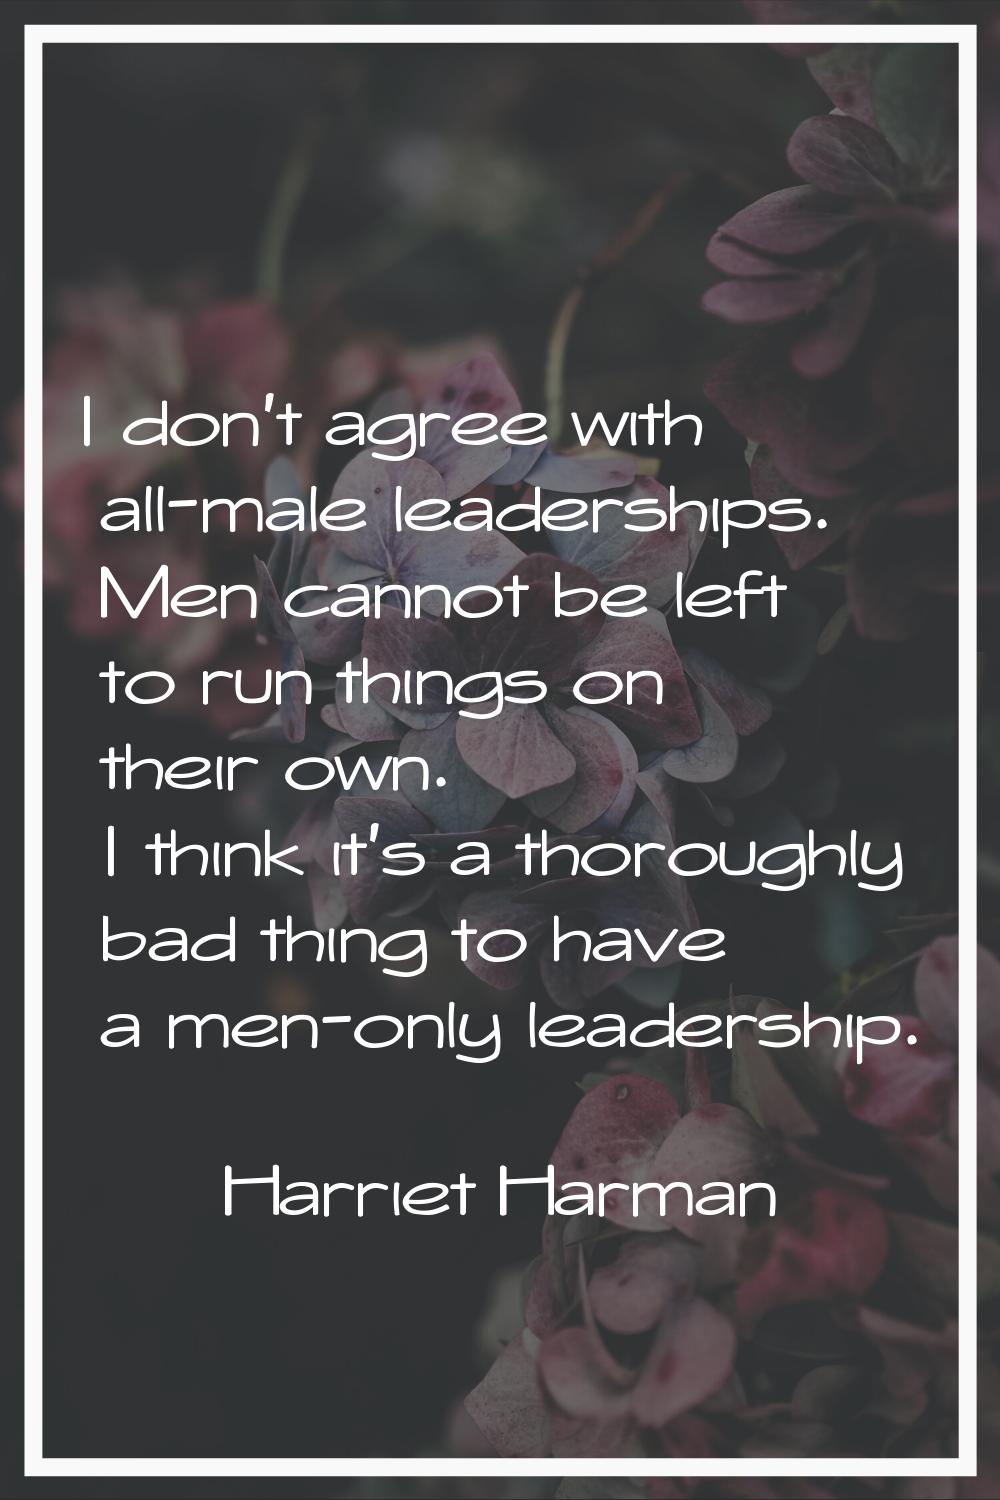 I don't agree with all-male leaderships. Men cannot be left to run things on their own. I think it'